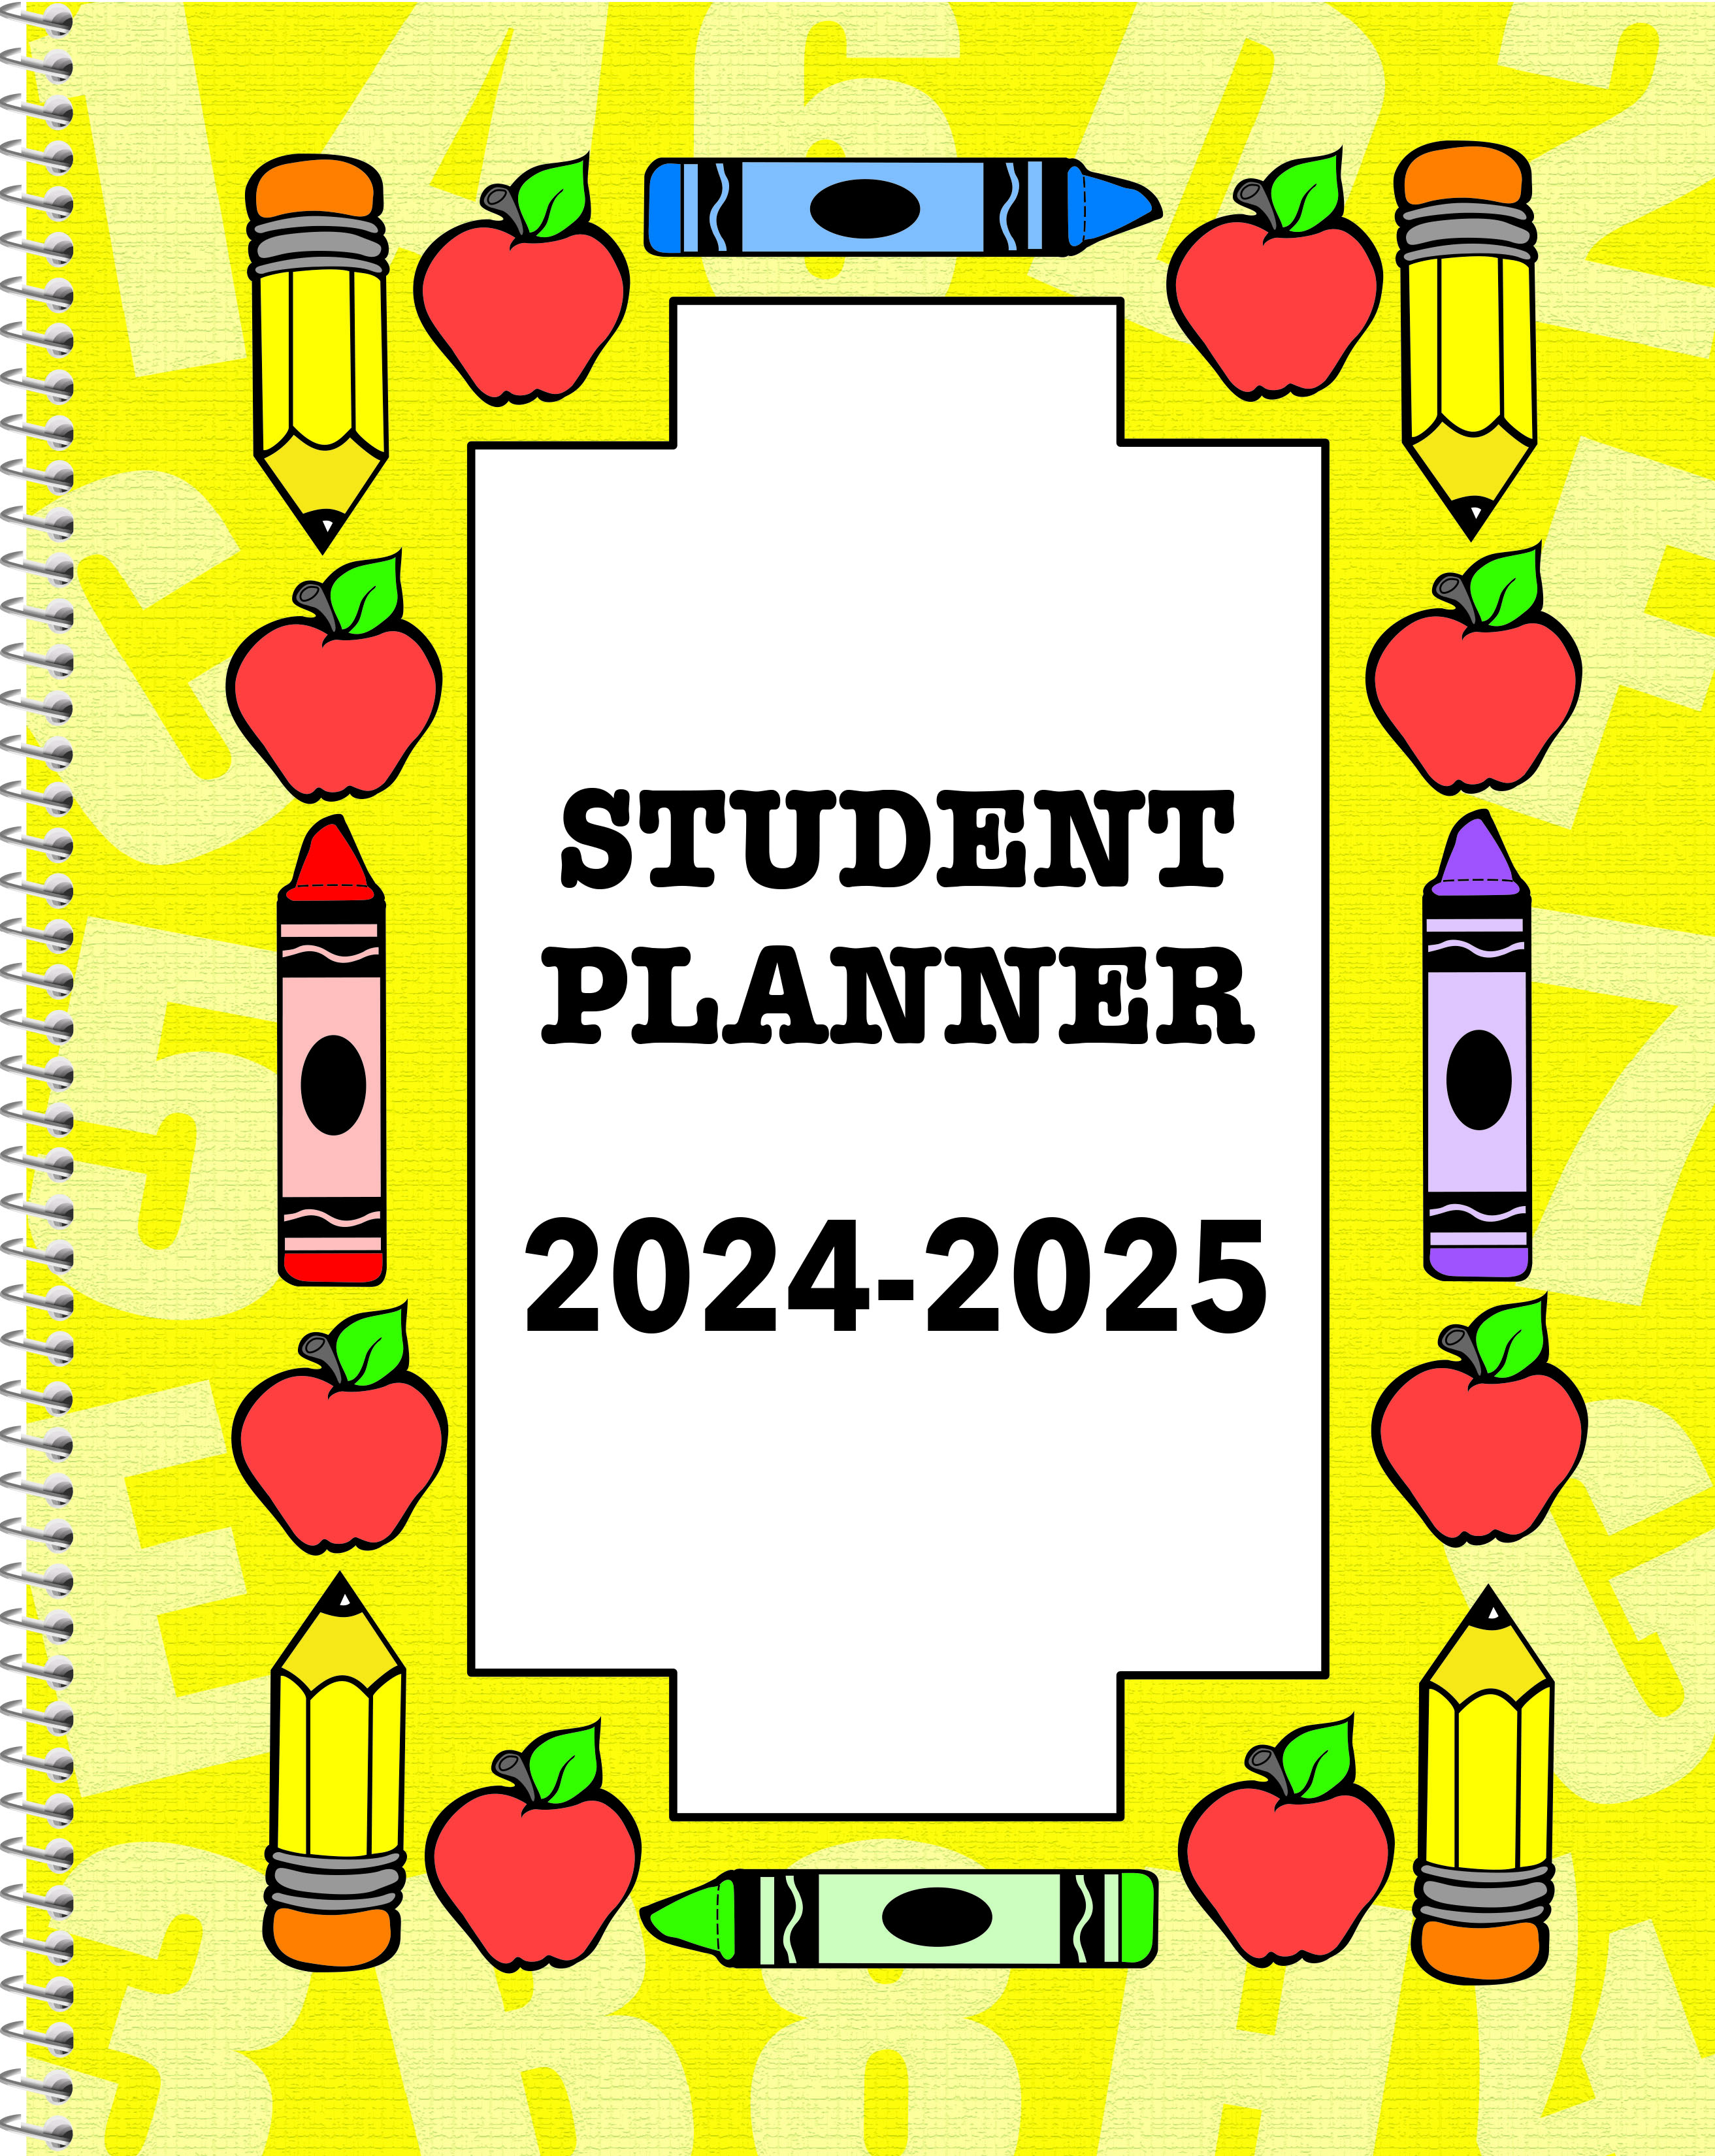 Primary Planner